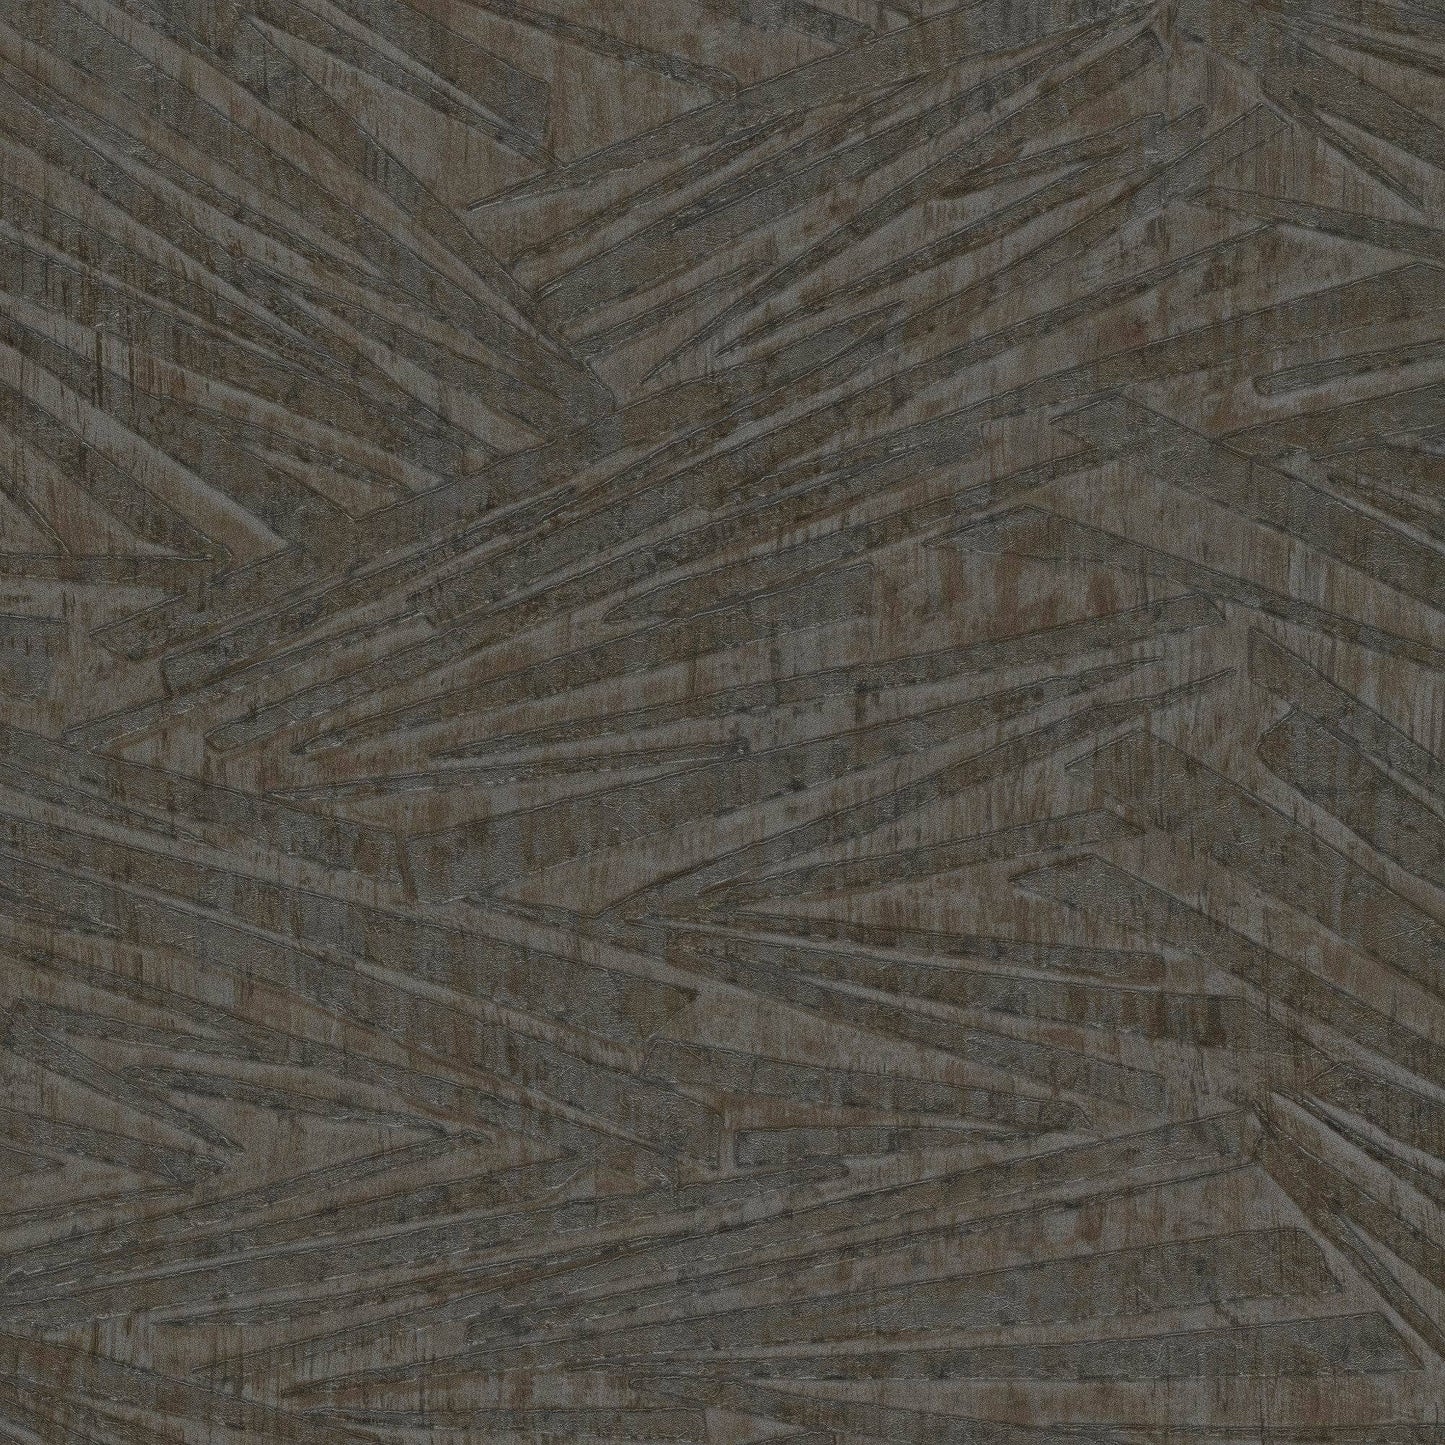  -  RASCH SKY LOUNGE ABSTRACT FRACTUAL ANTHRACITE 608366  -  60009366